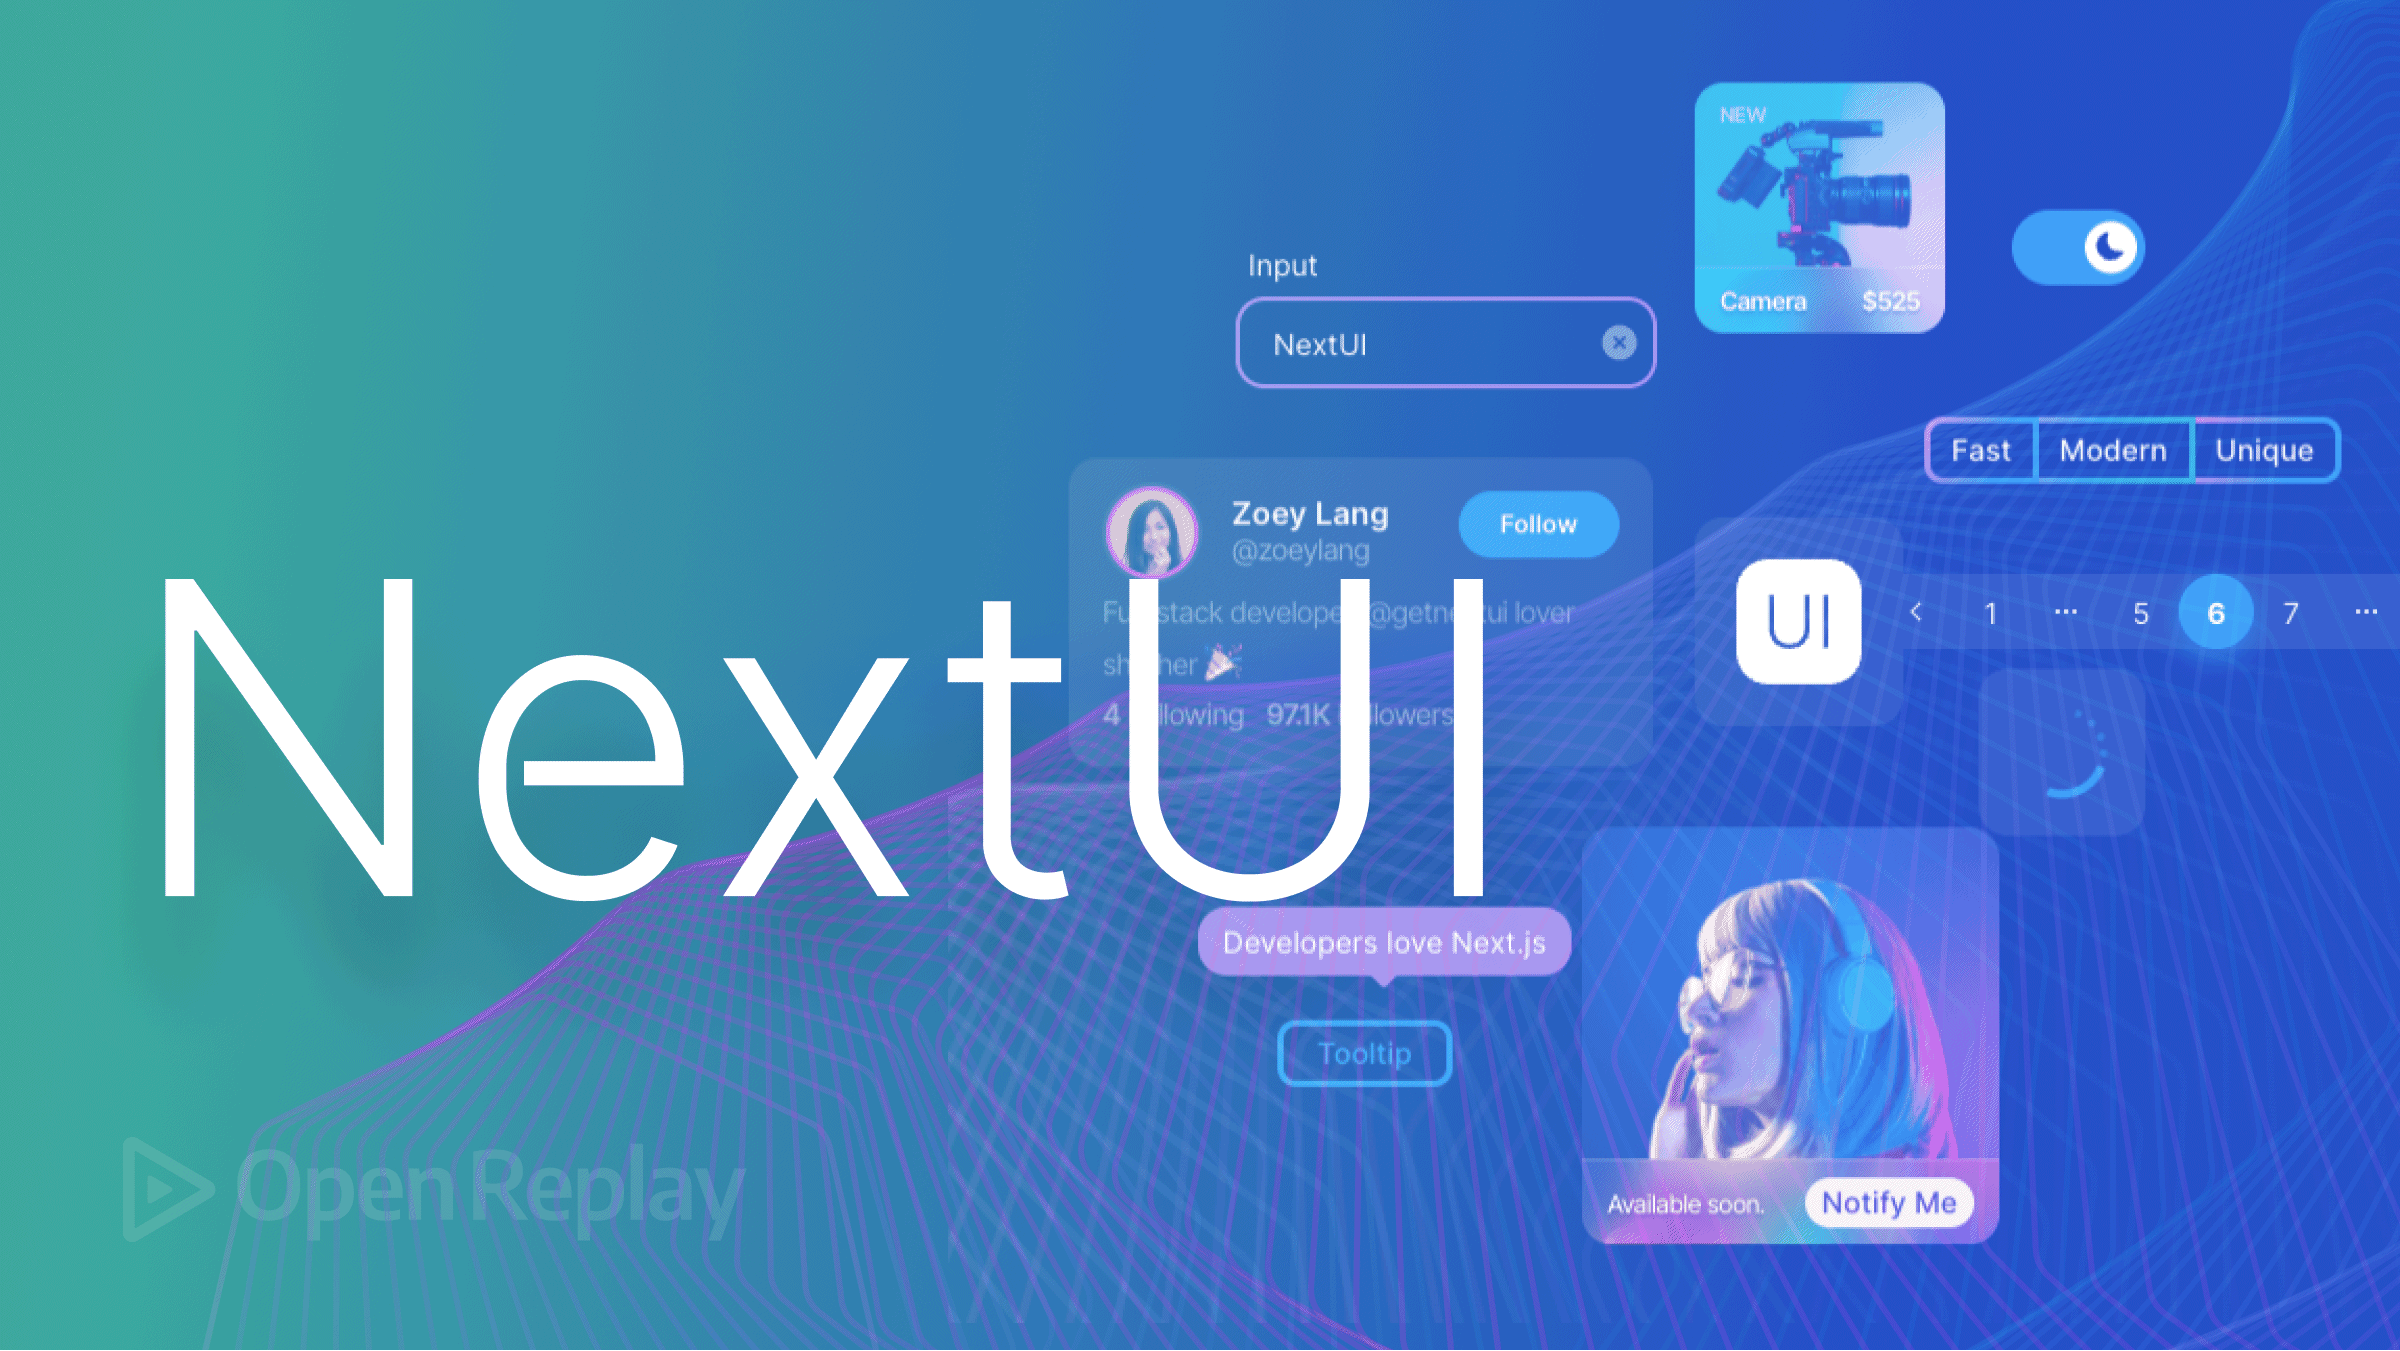 Build beautiful UI components with NextUI